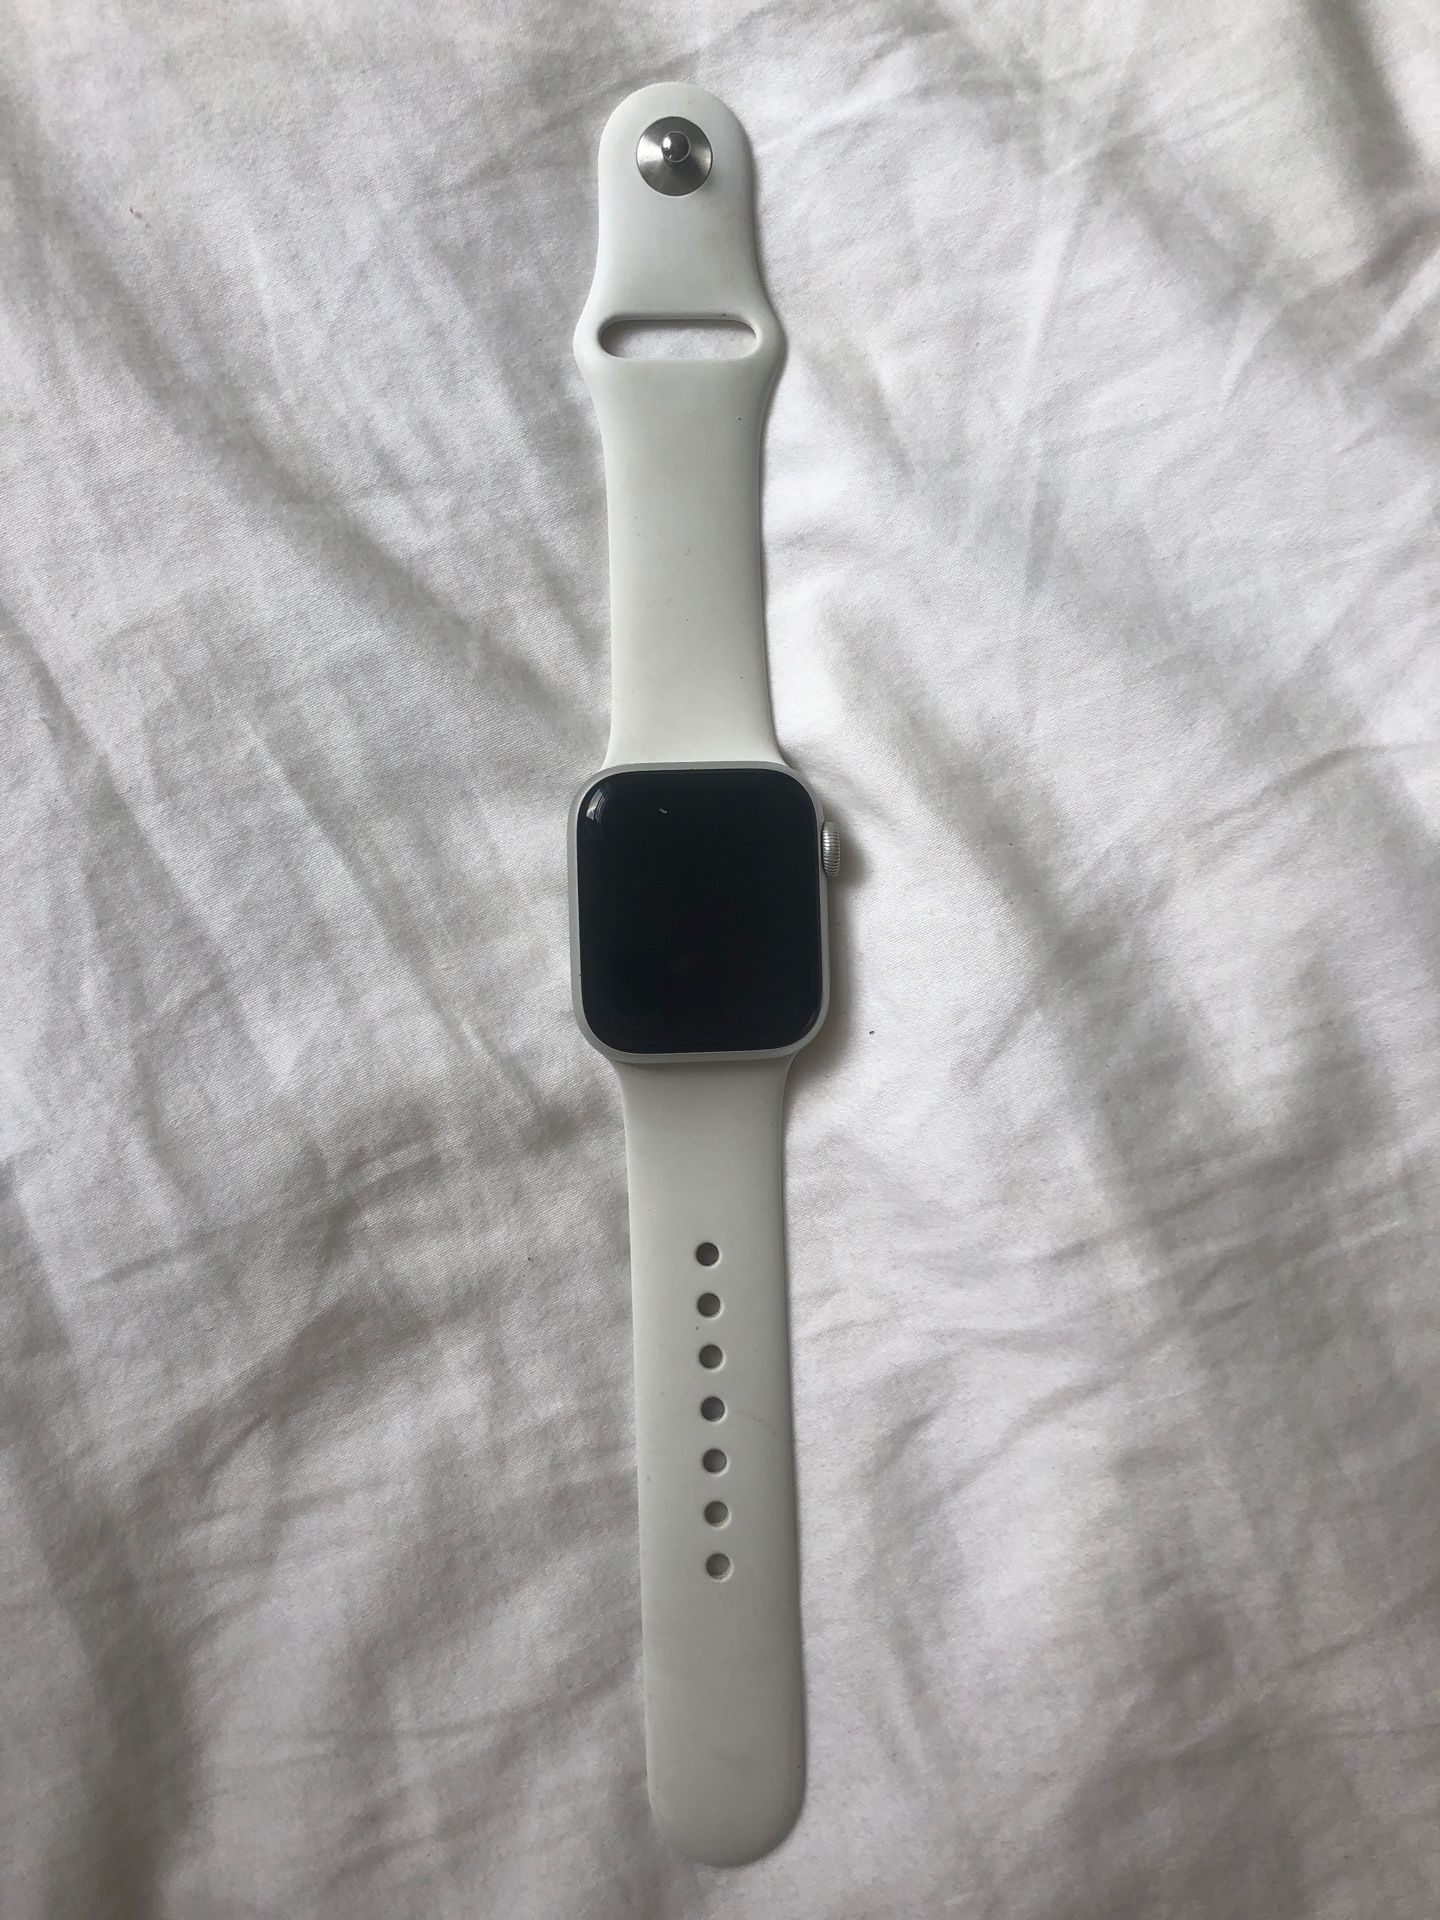 Apple Watch series 5 with GPS 40mm case